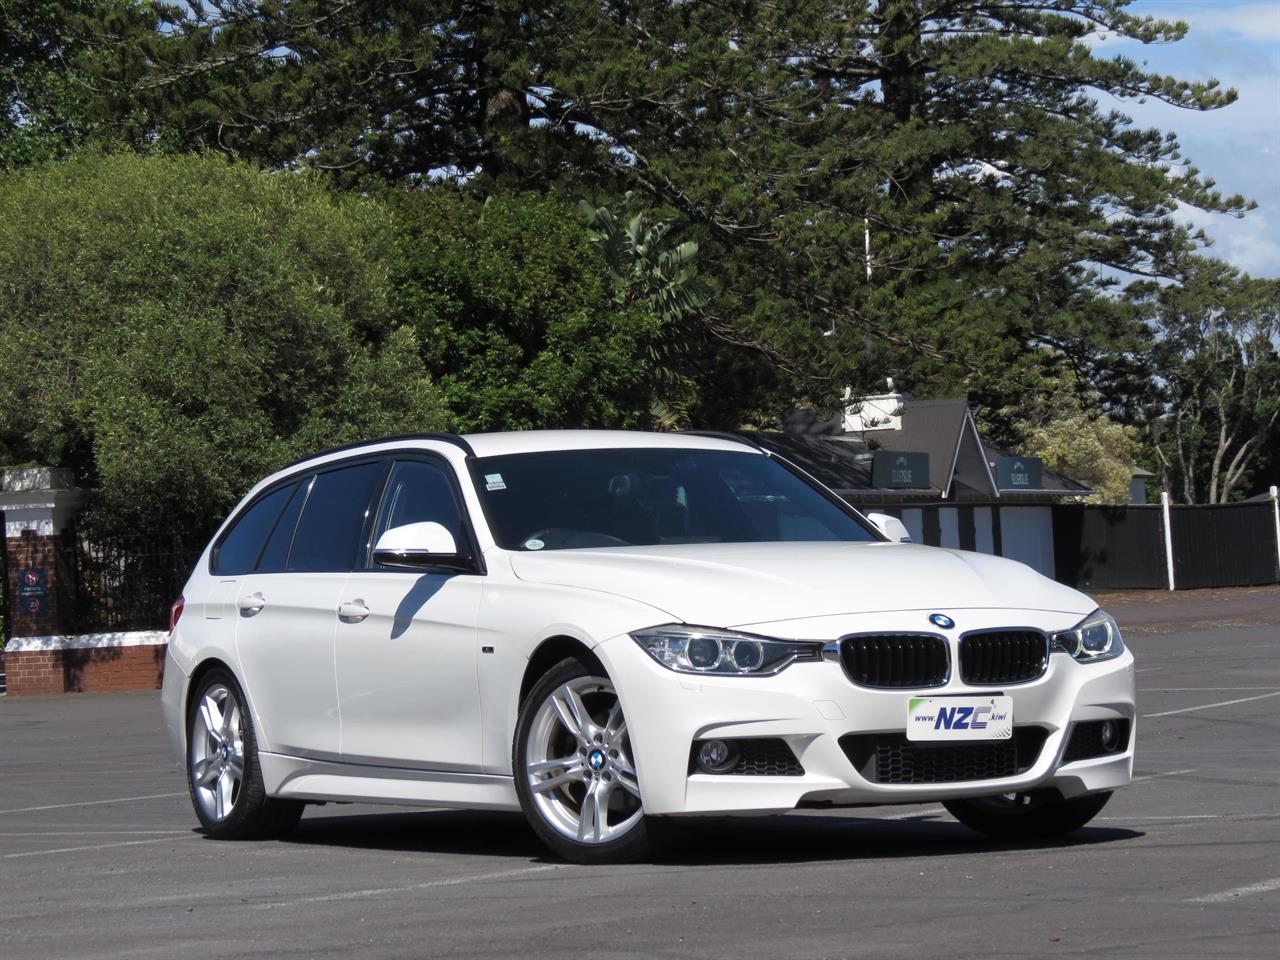 NZC 2012 BMW 320d just arrived to Auckland